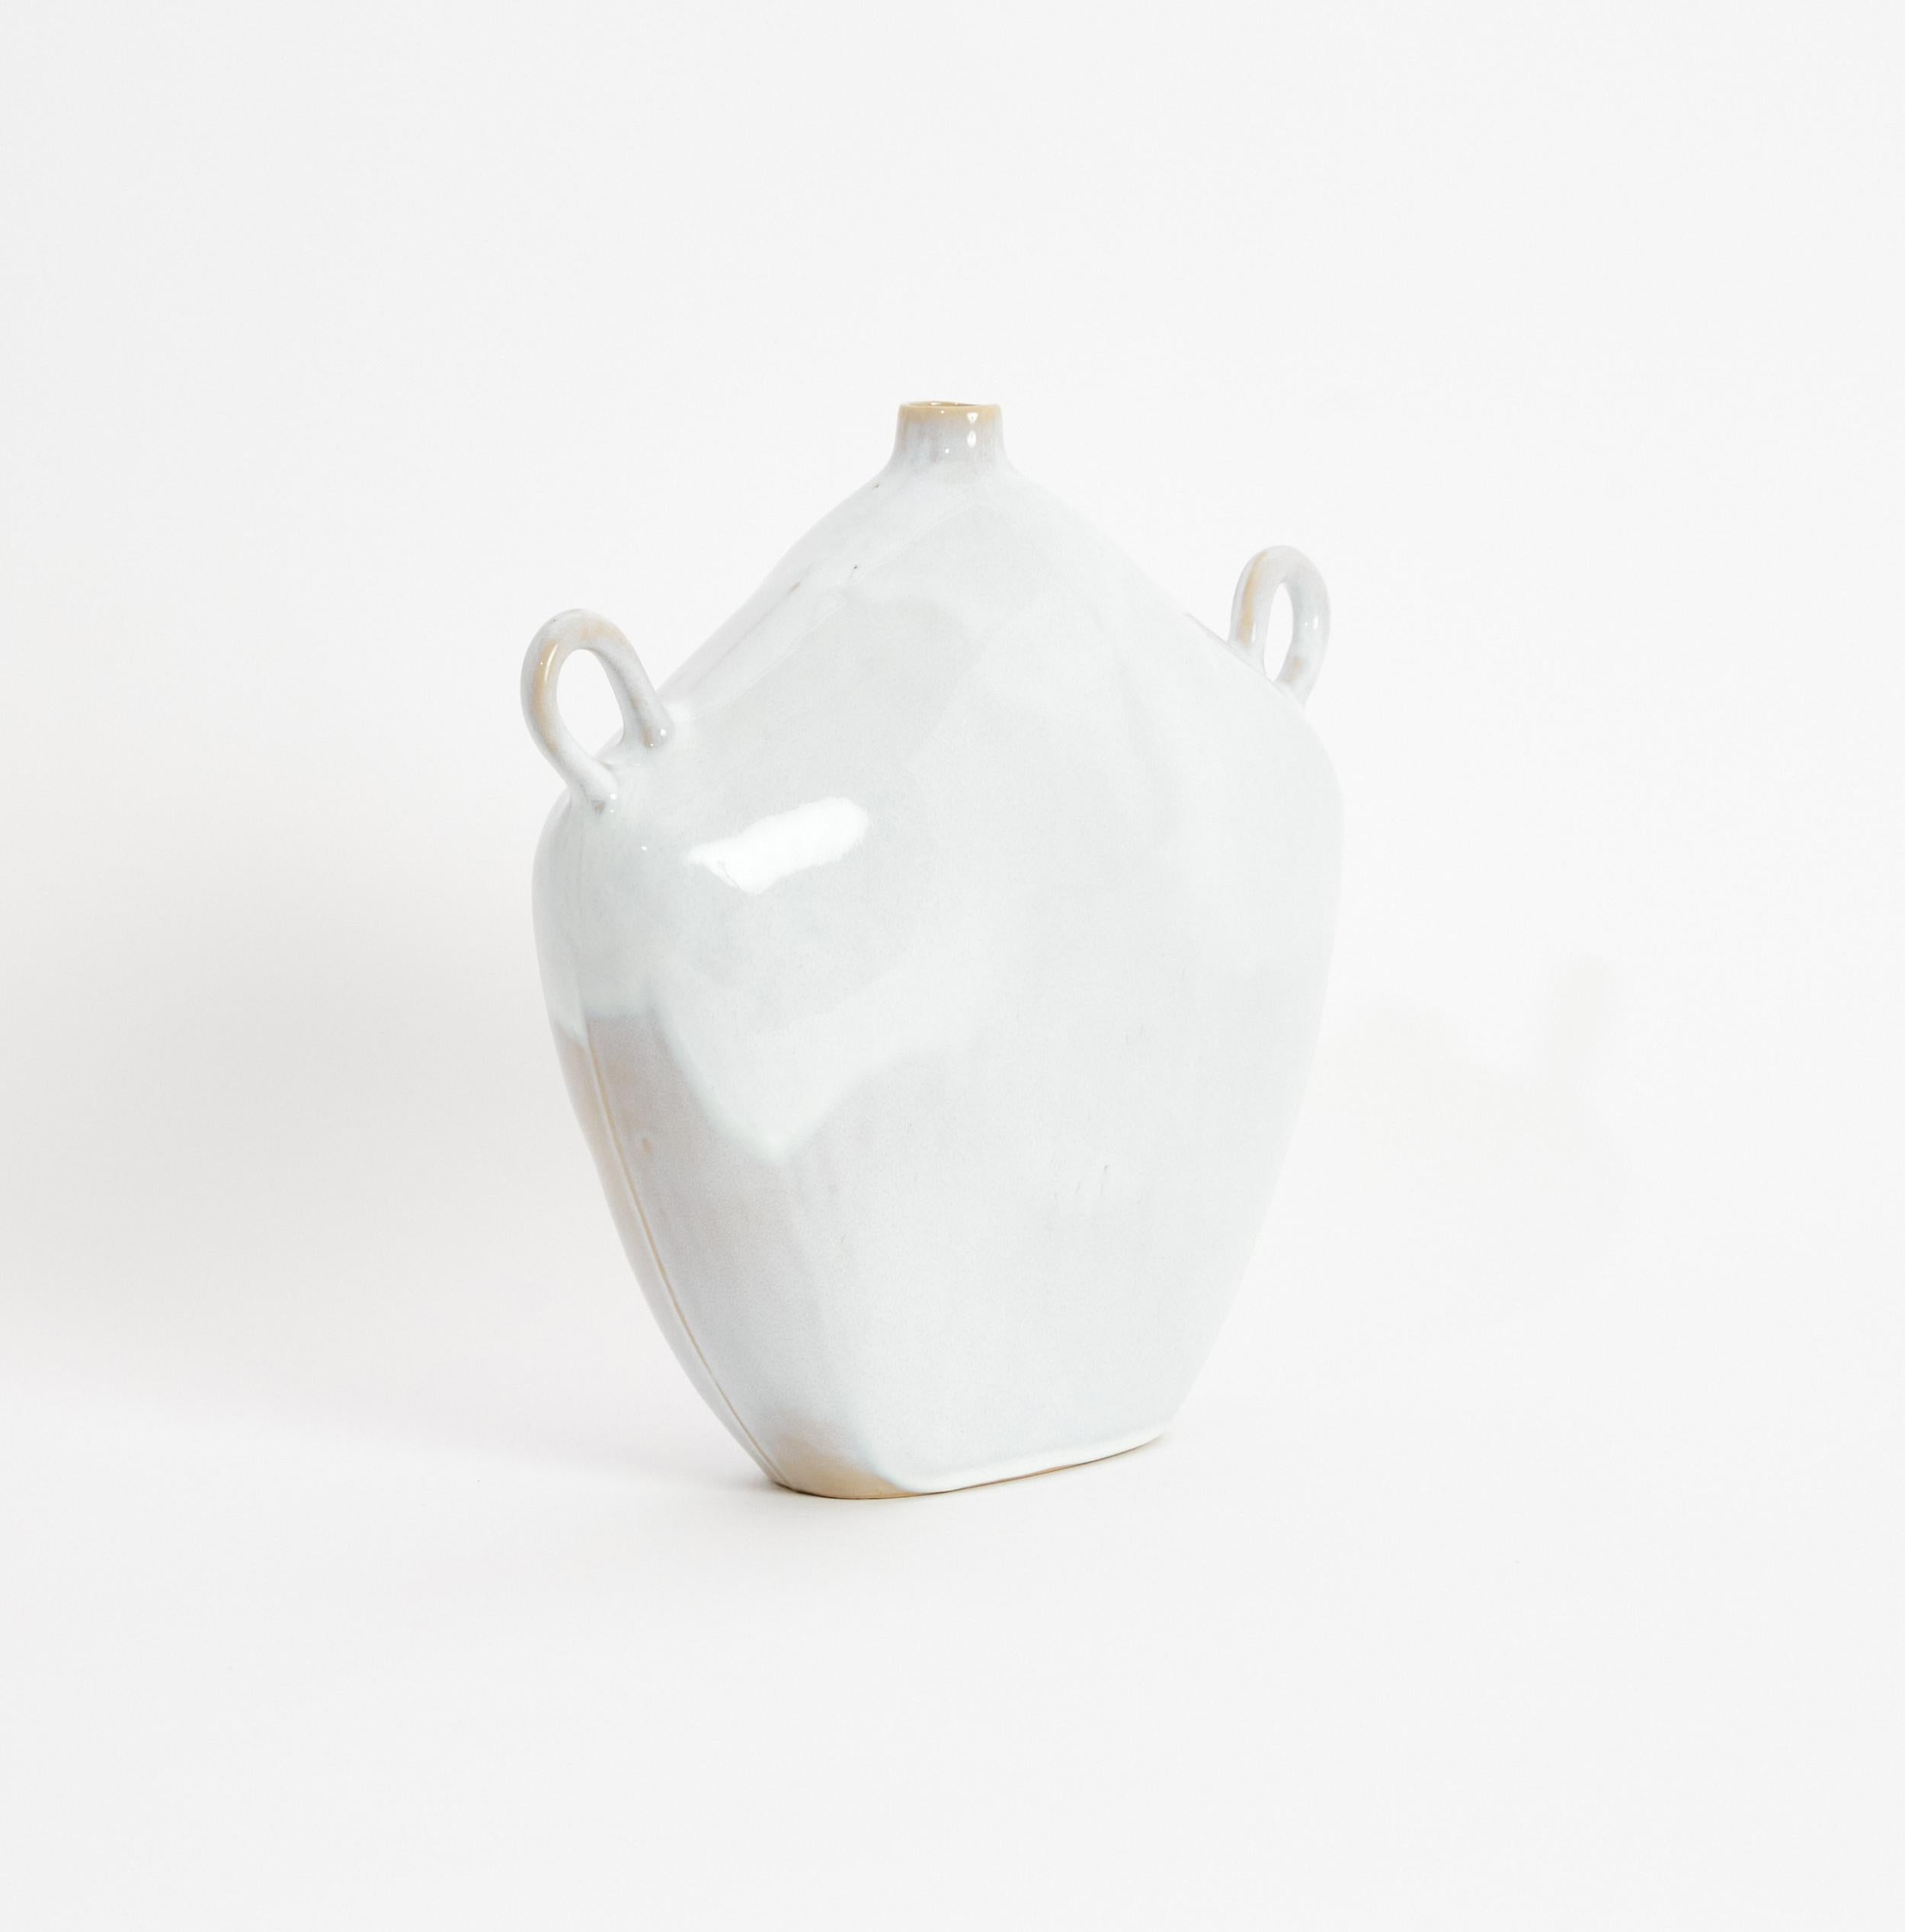 Maria vessel in Shiny White 
Designed by Project 213A in 2020
Handmade Stoneware

This vase is inspired by the Greco-Roman period, having a timeless appearance and finished with a contemporary textured shiny glaze. Each piece develops its own